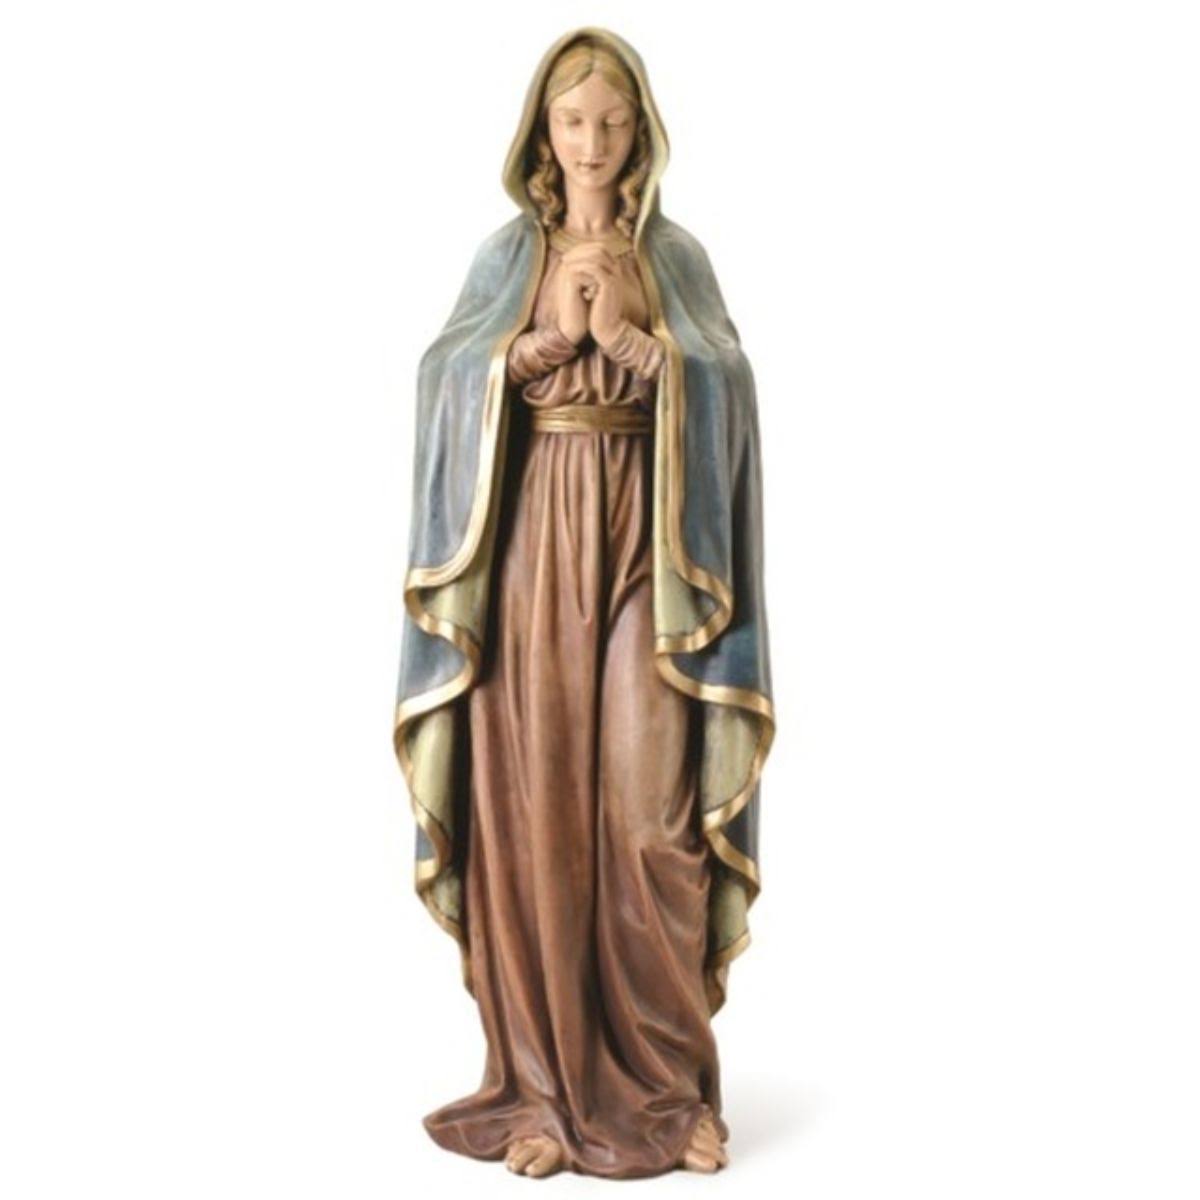 Praying Madonna Statue 37 Inches High Resin Figurine | Virgin Mary |